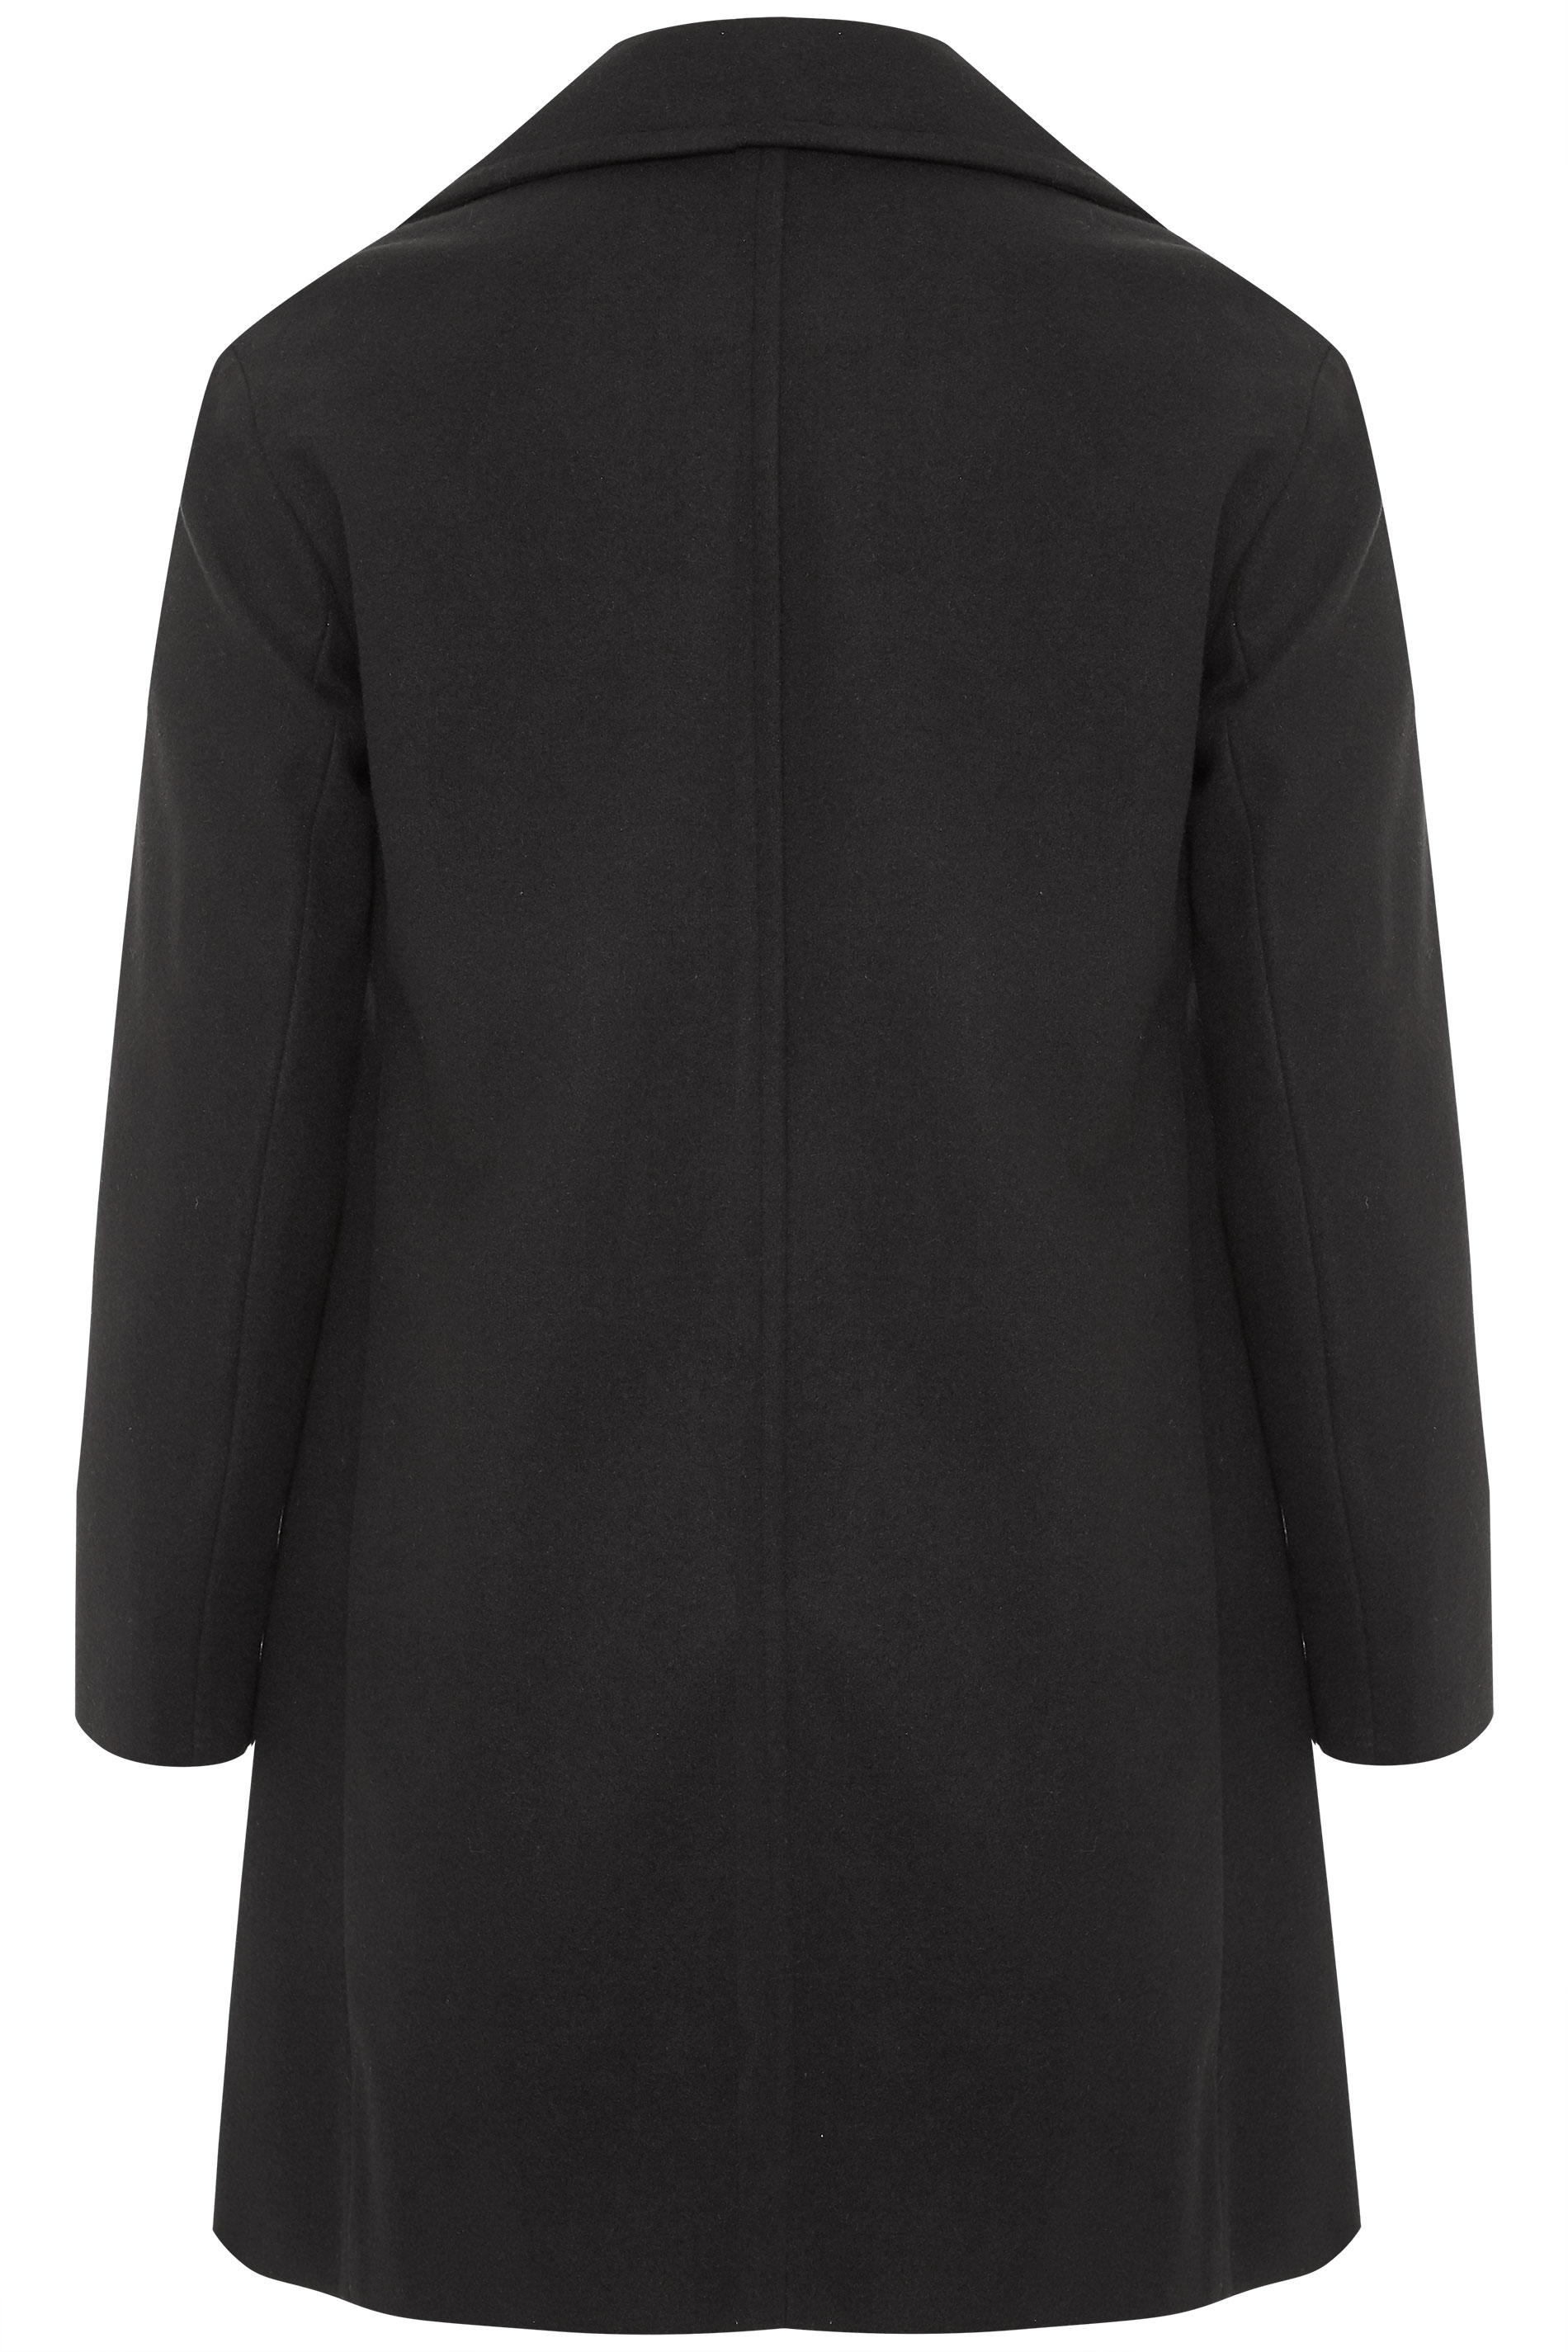 Black Collared Button Coat | Yours Clothing